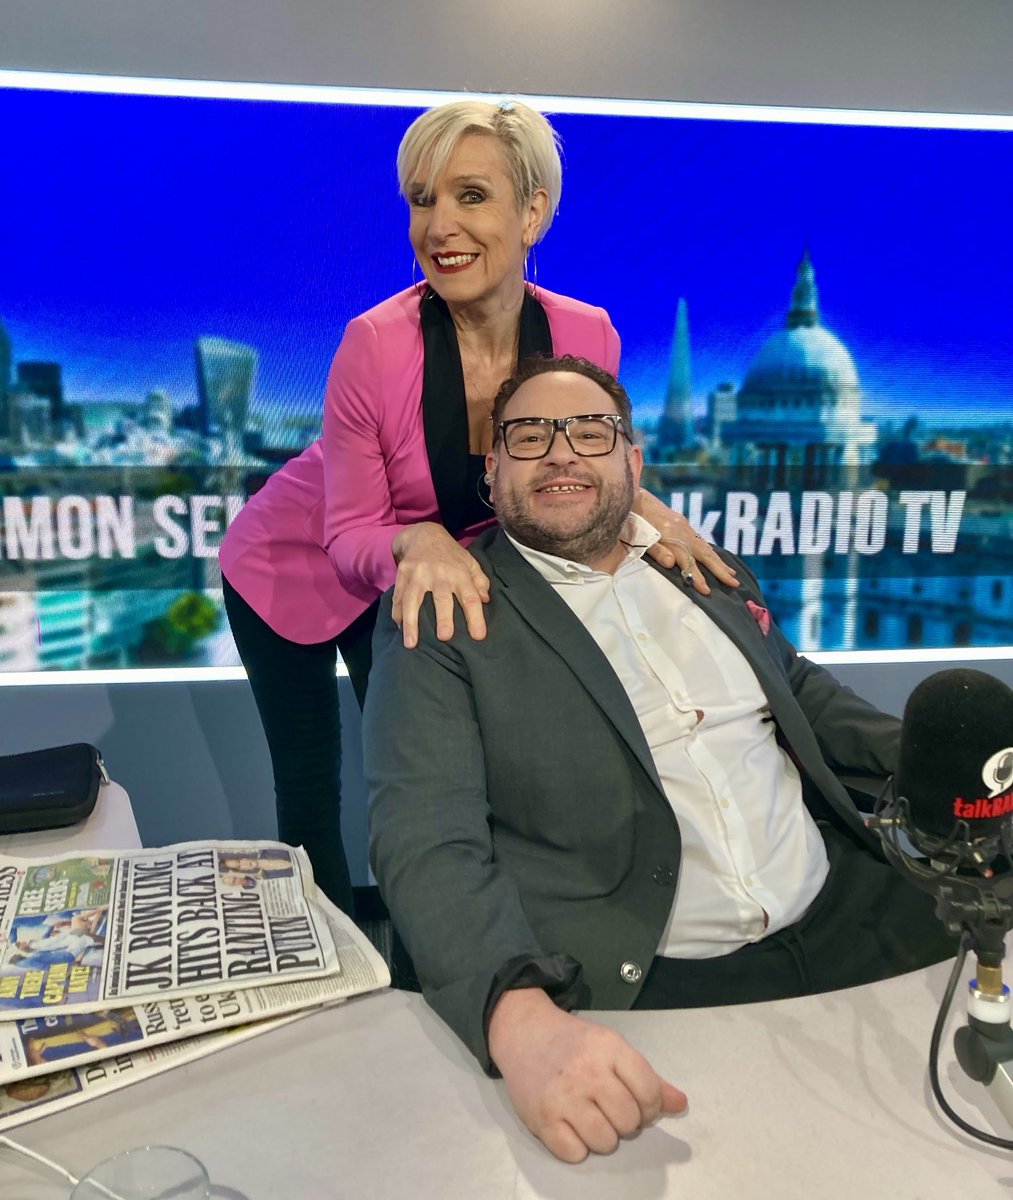 The things I do for this man…😉Flashback to all the very early mornings spent with ⁦@cristo_radio⁩. So much naughty fun 😈 These days it’s all cuddly cardis 🤫😂#broadcasting 📻